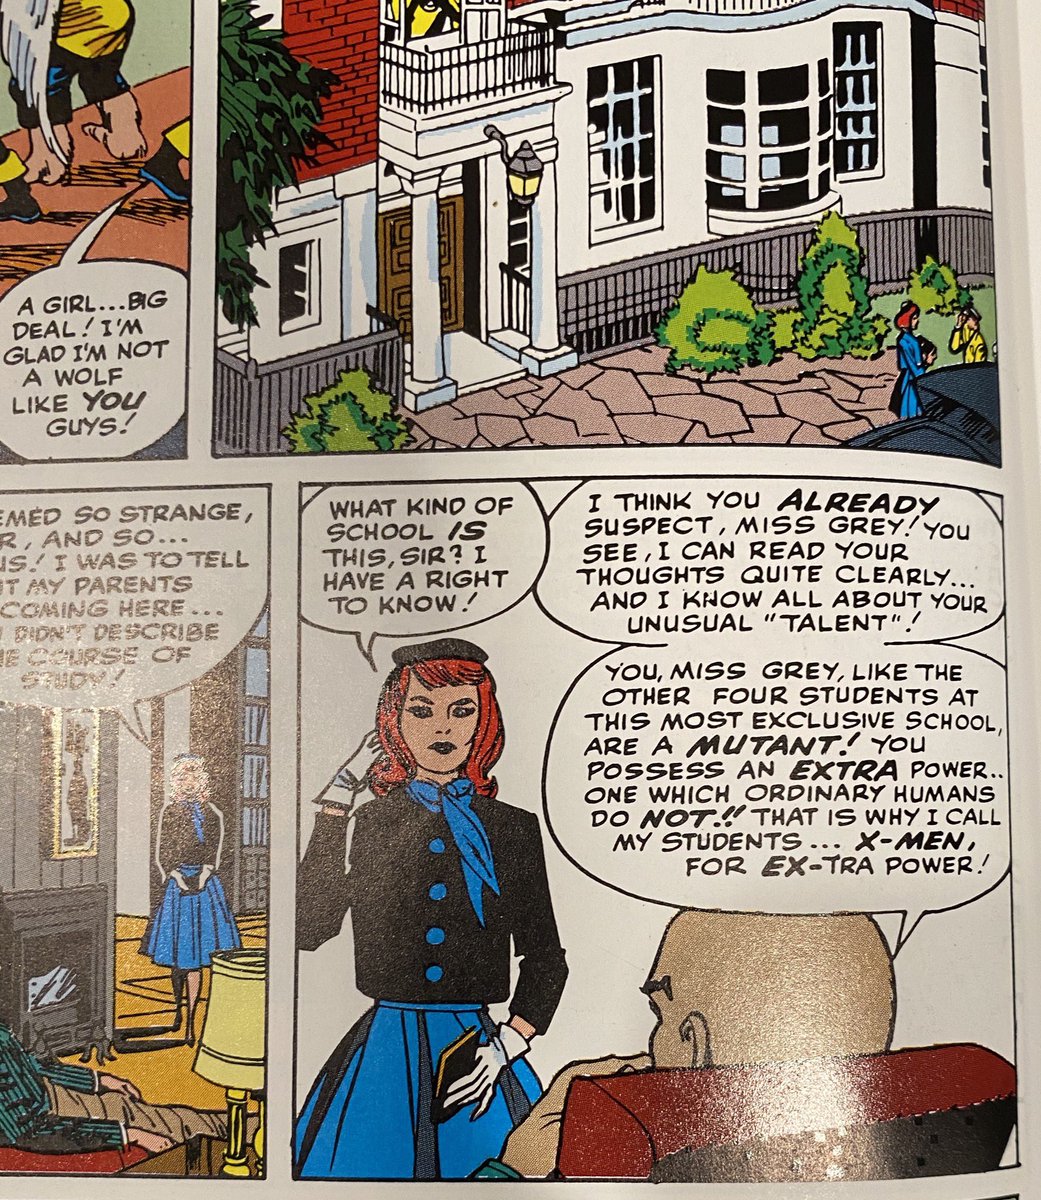 In the original 60s run, the implication is mutation is caused by nuclear radiation. In #1 Xavier says he believes he is the first mutant, and his parents worked on the A-Bomb. The idea of an “X-Gene” or “X-Factor” comes much later and isn’t why they’re called X-Men. (1/?)  https://twitter.com/cockroacharles/status/1304986620232232960